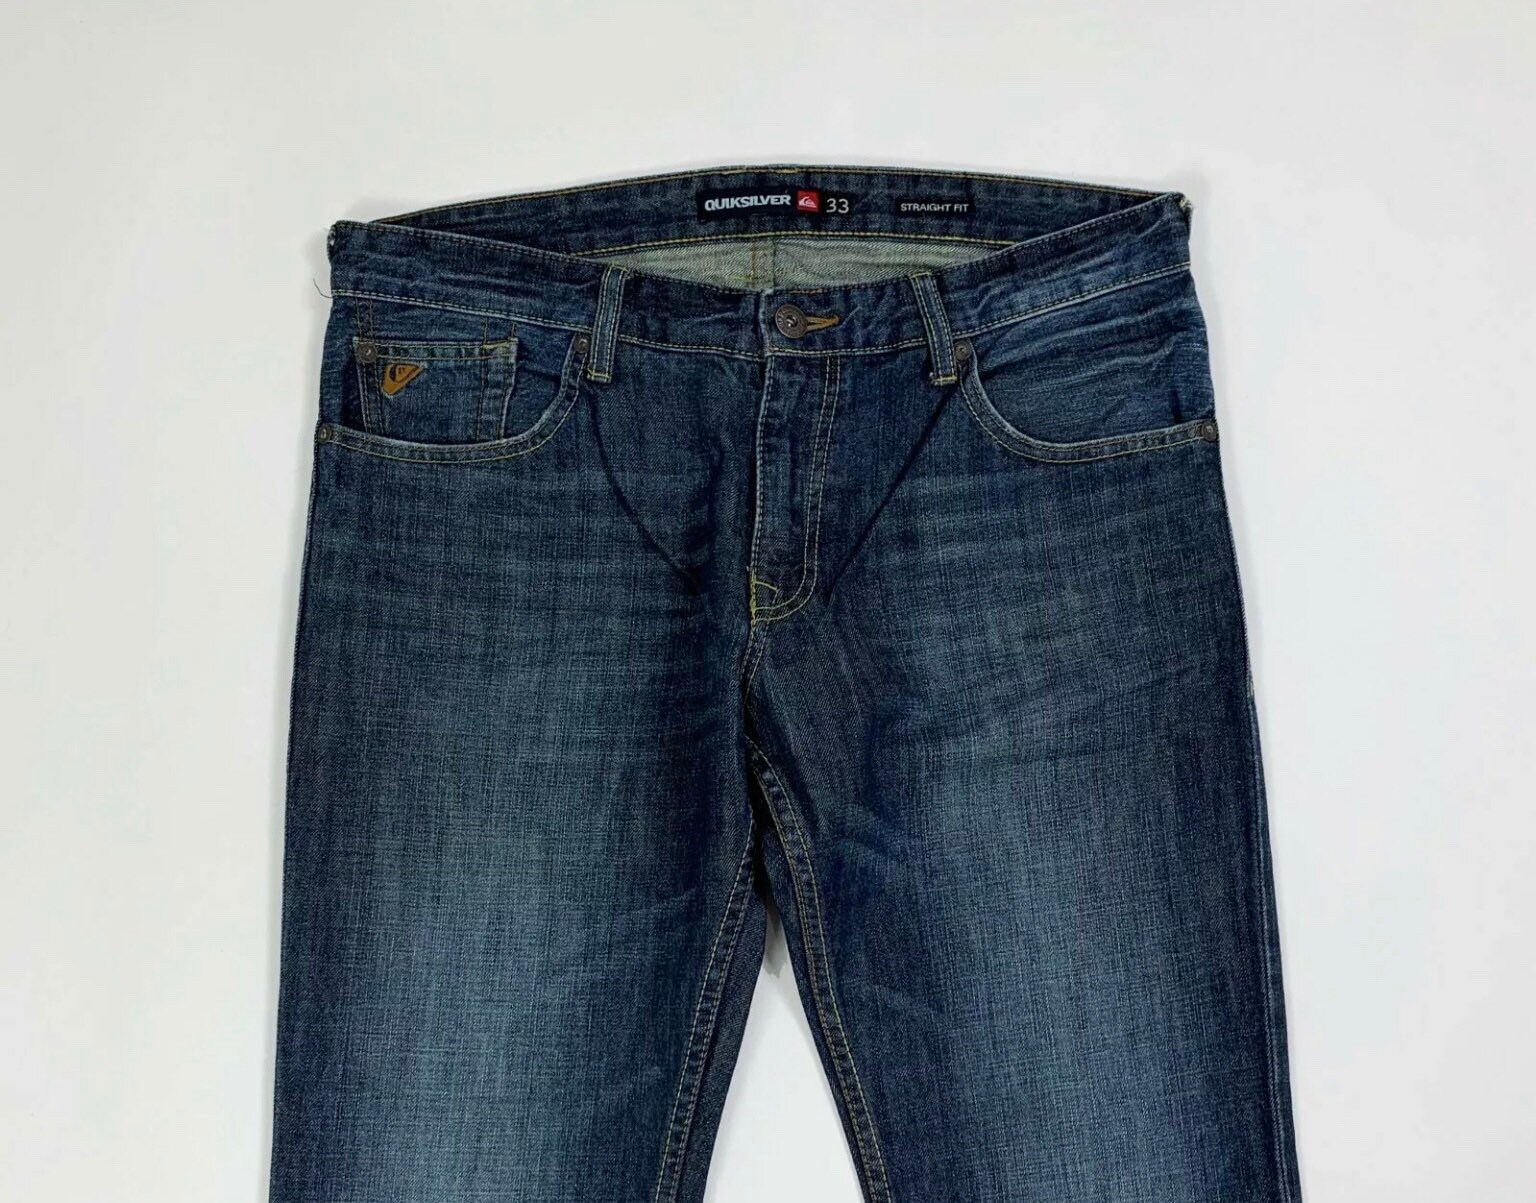 Quiksilver Vintage Quicksilver Saltwater Denim Mid Wash Blue Jeans W 33 L 33 Made in Mexico 